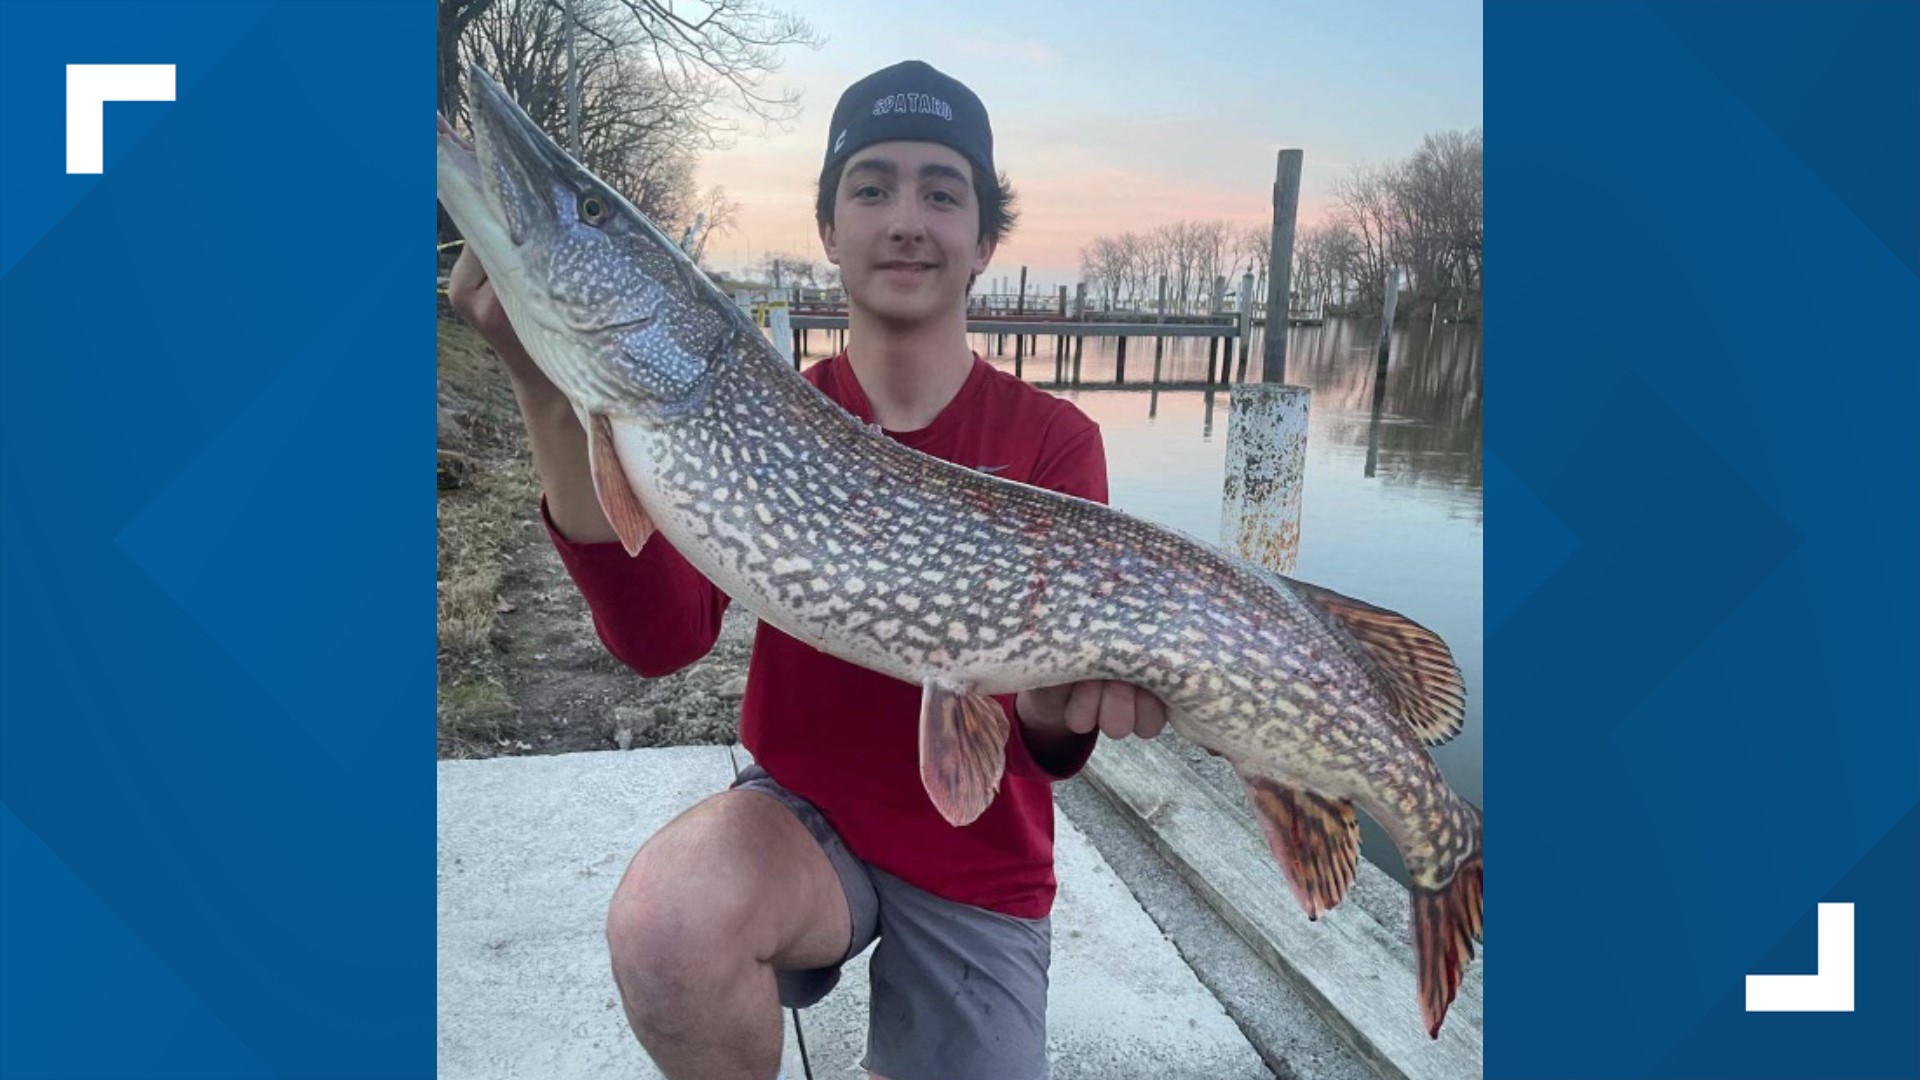 13-year-old Sam Spataro reeled in the fish on Mentor Lagoons, but because he didn't want to harm the sea creature, he let it go without weighing it for the record.